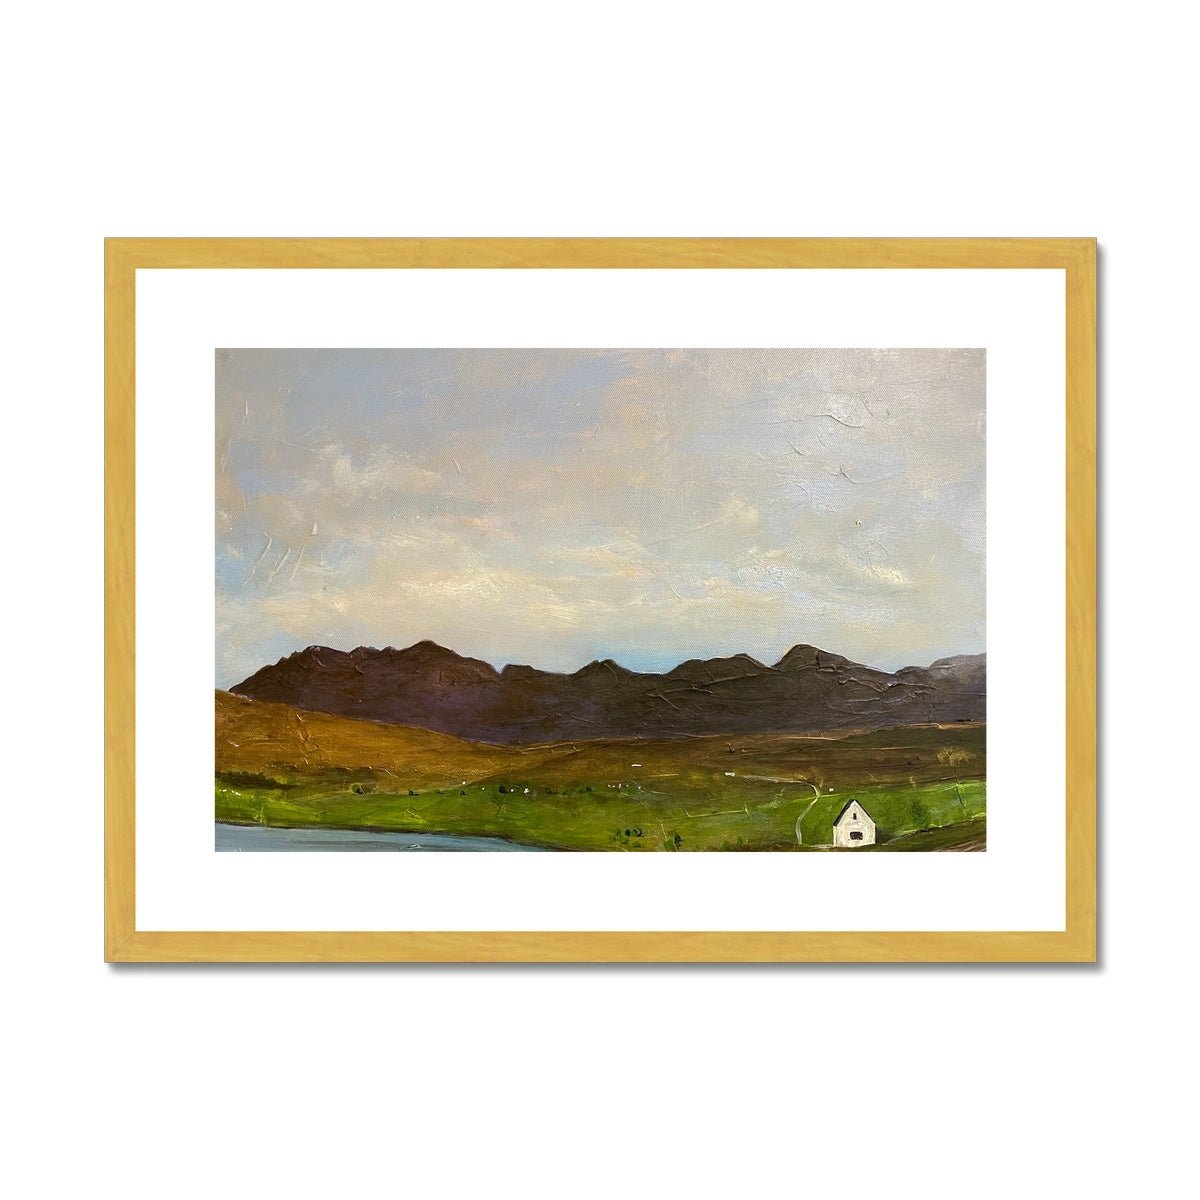 The Road To Carbost Skye Painting | Antique Framed & Mounted Prints From Scotland-Antique Framed & Mounted Prints-Skye Art Gallery-A2 Landscape-Gold Frame-Paintings, Prints, Homeware, Art Gifts From Scotland By Scottish Artist Kevin Hunter